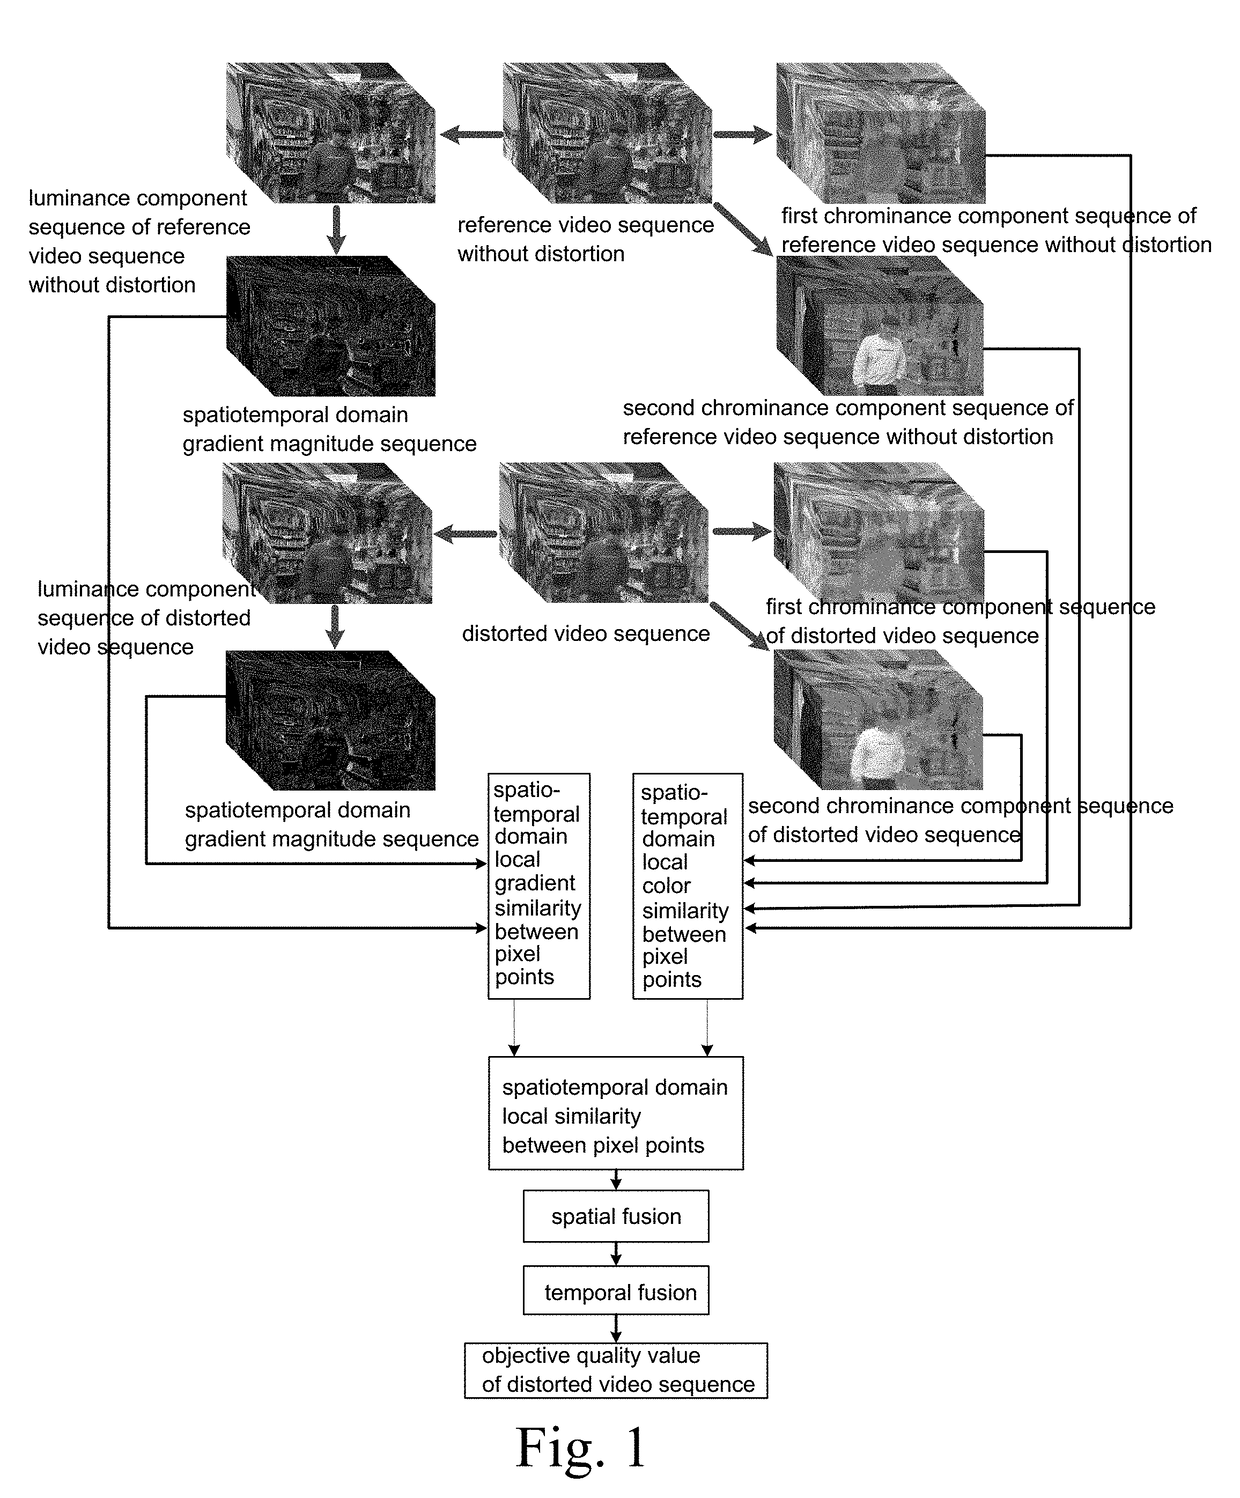 Video quality objective assessment method based on spatiotemporal domain structure